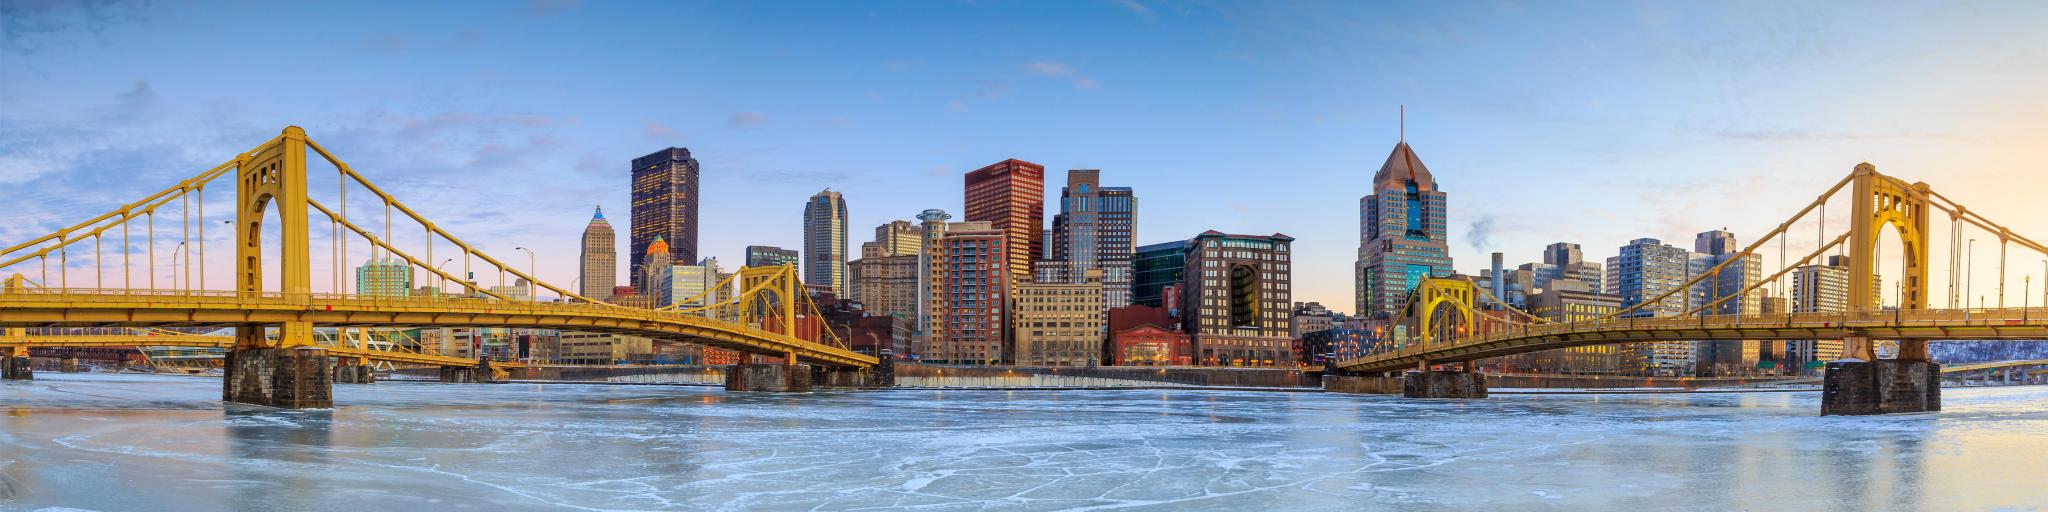 Panorama of downtown Pittsburgh at twilight, with skyscrapers and bridges across the waterfront